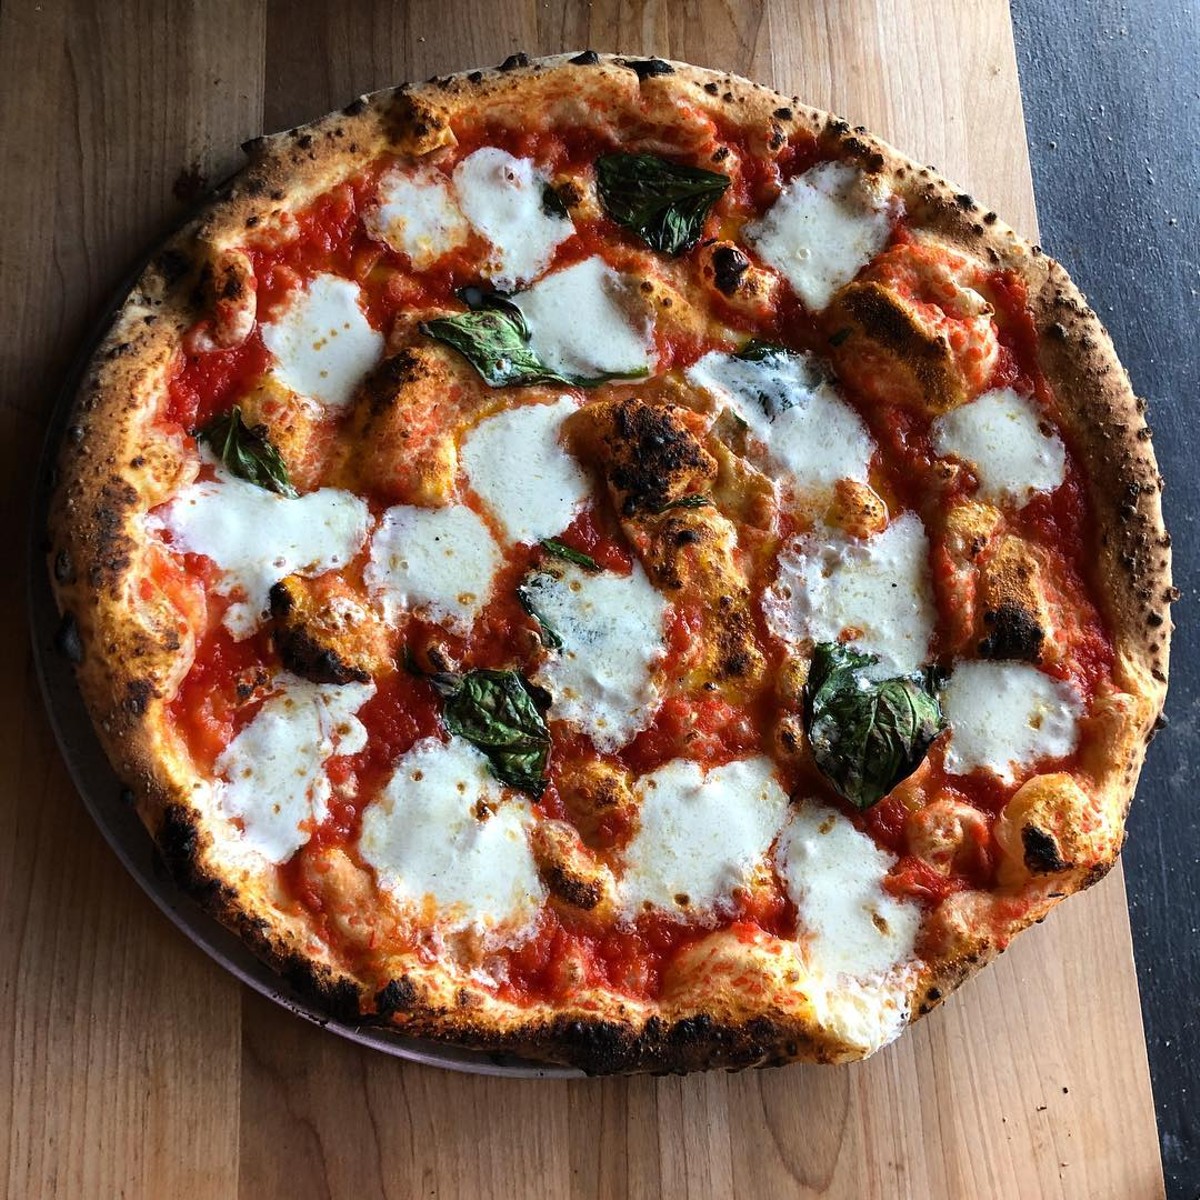 Pizza Bruno is now open for lunch, Root & Branch Bistro coming to Clermont and more in Orlando foodie news